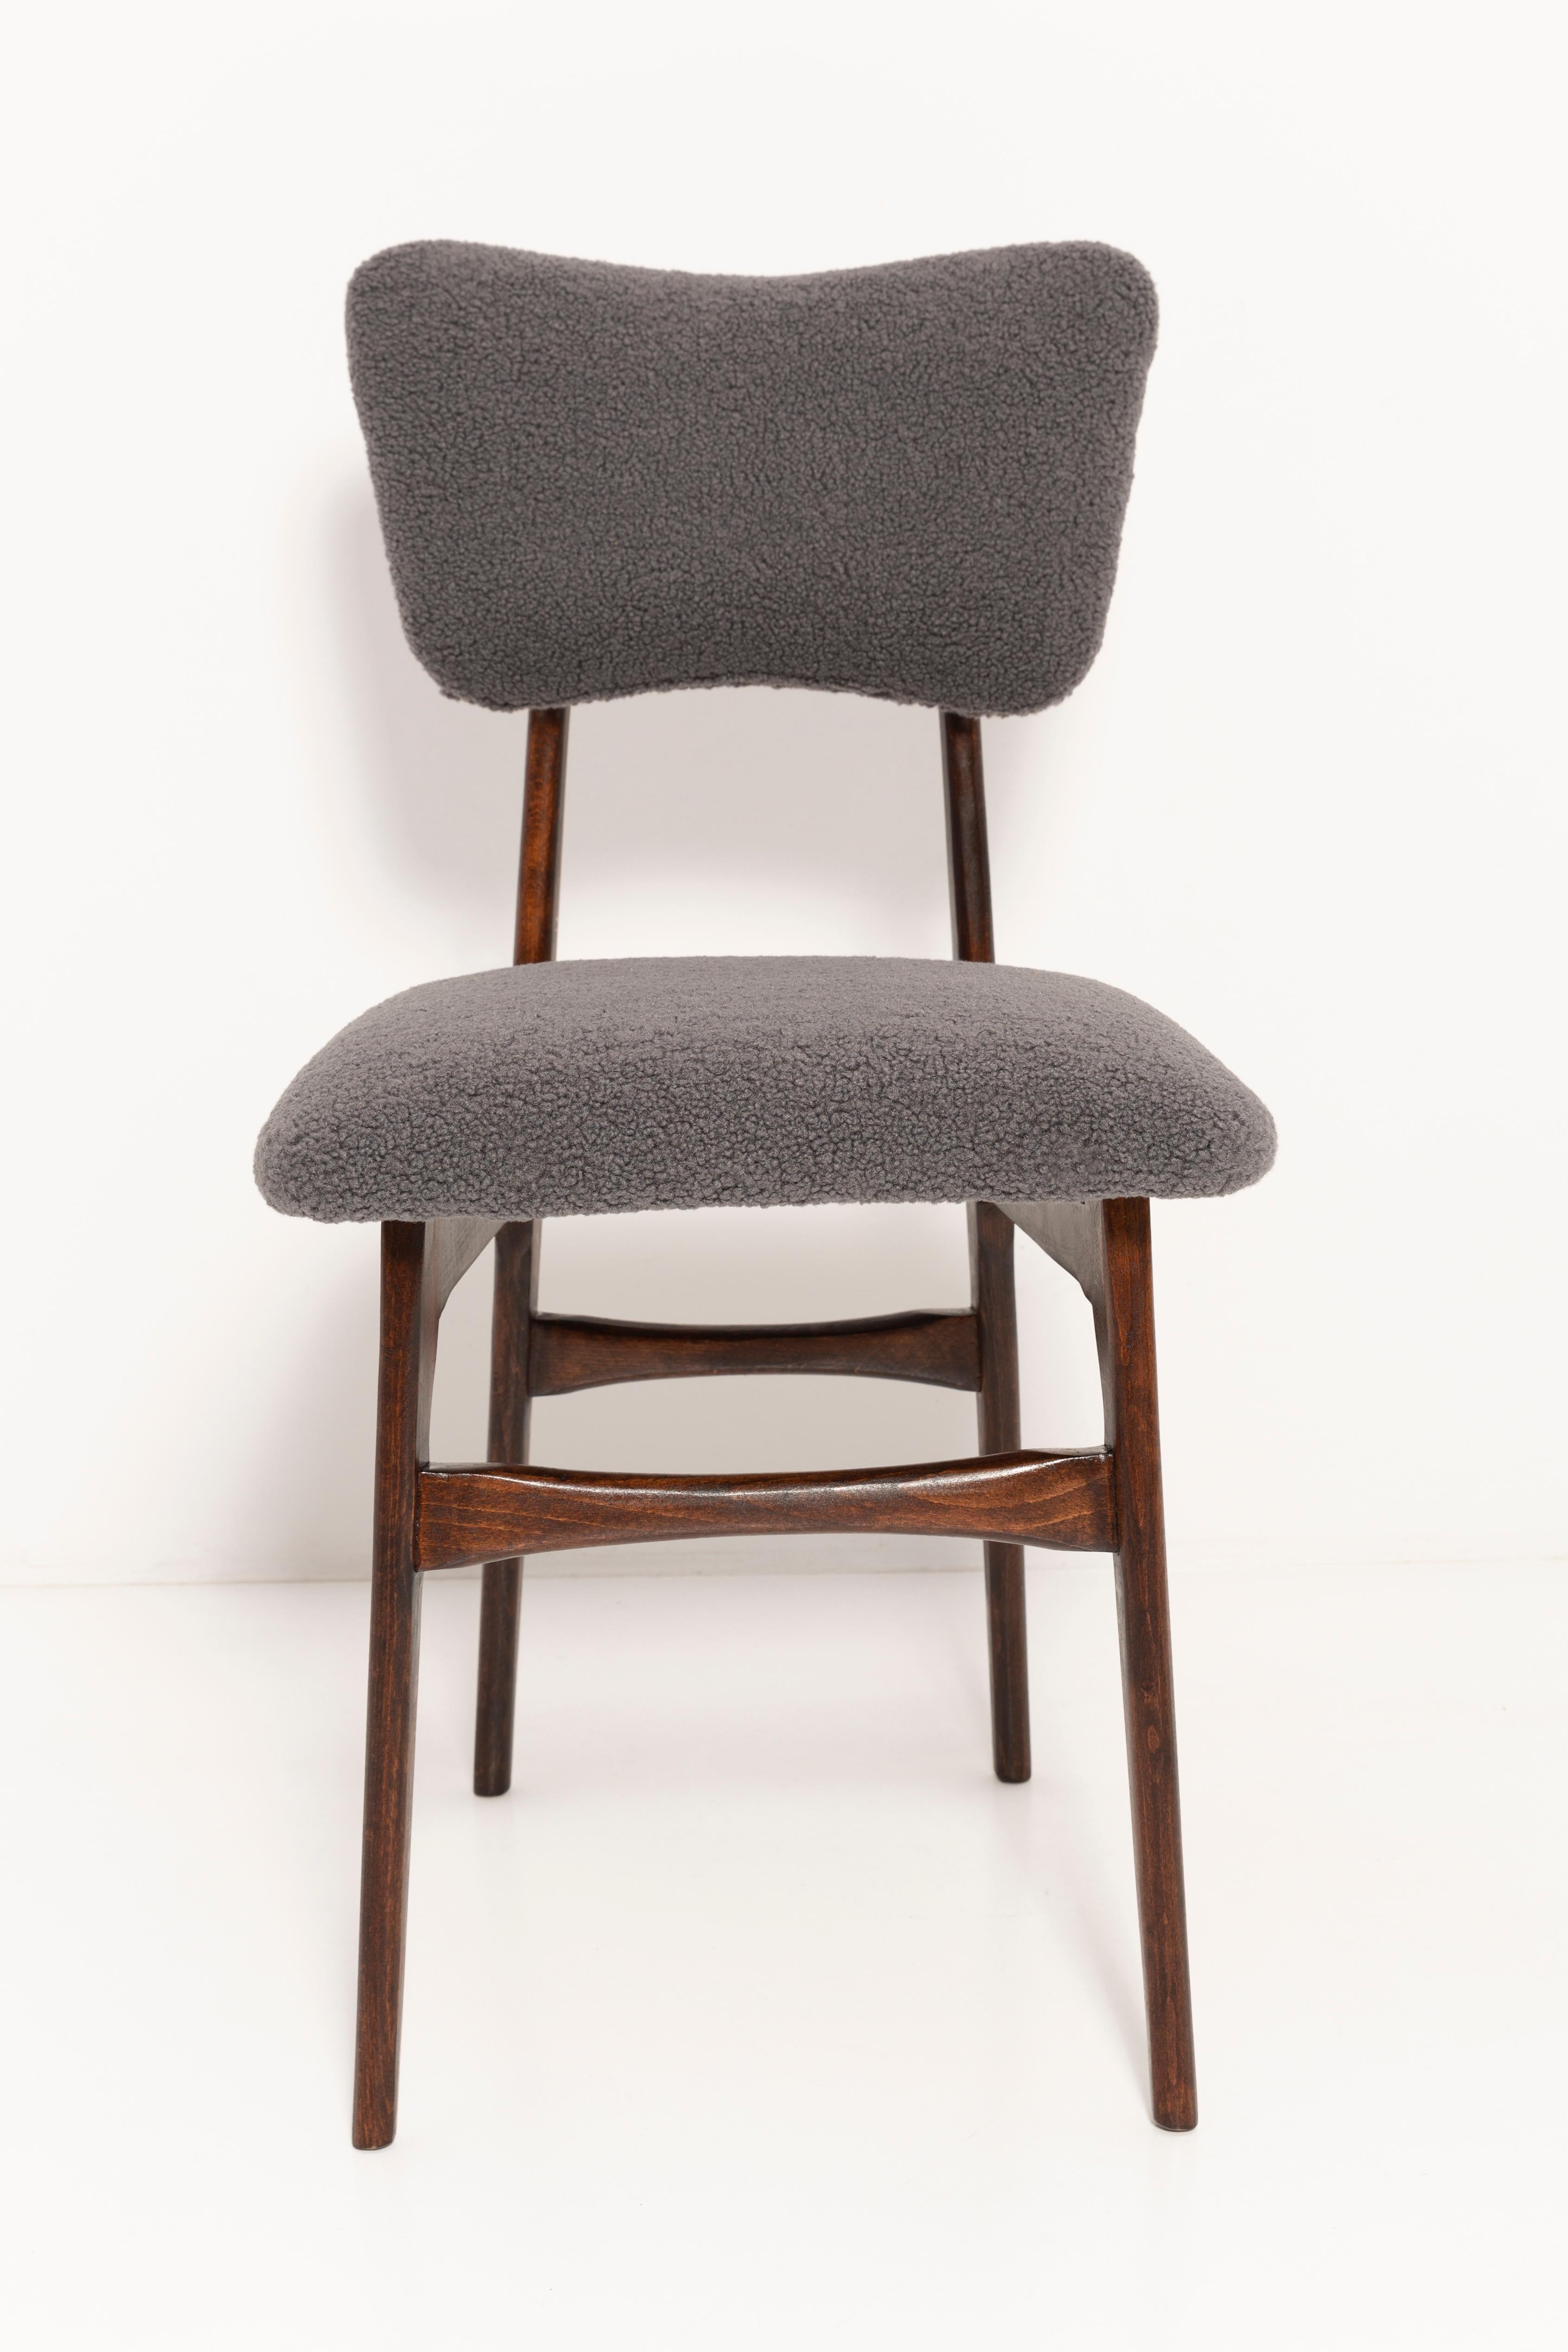 Set of Twelve 20th Century Dark Gray Boucle Chairs, Europe, 1960s For Sale 4